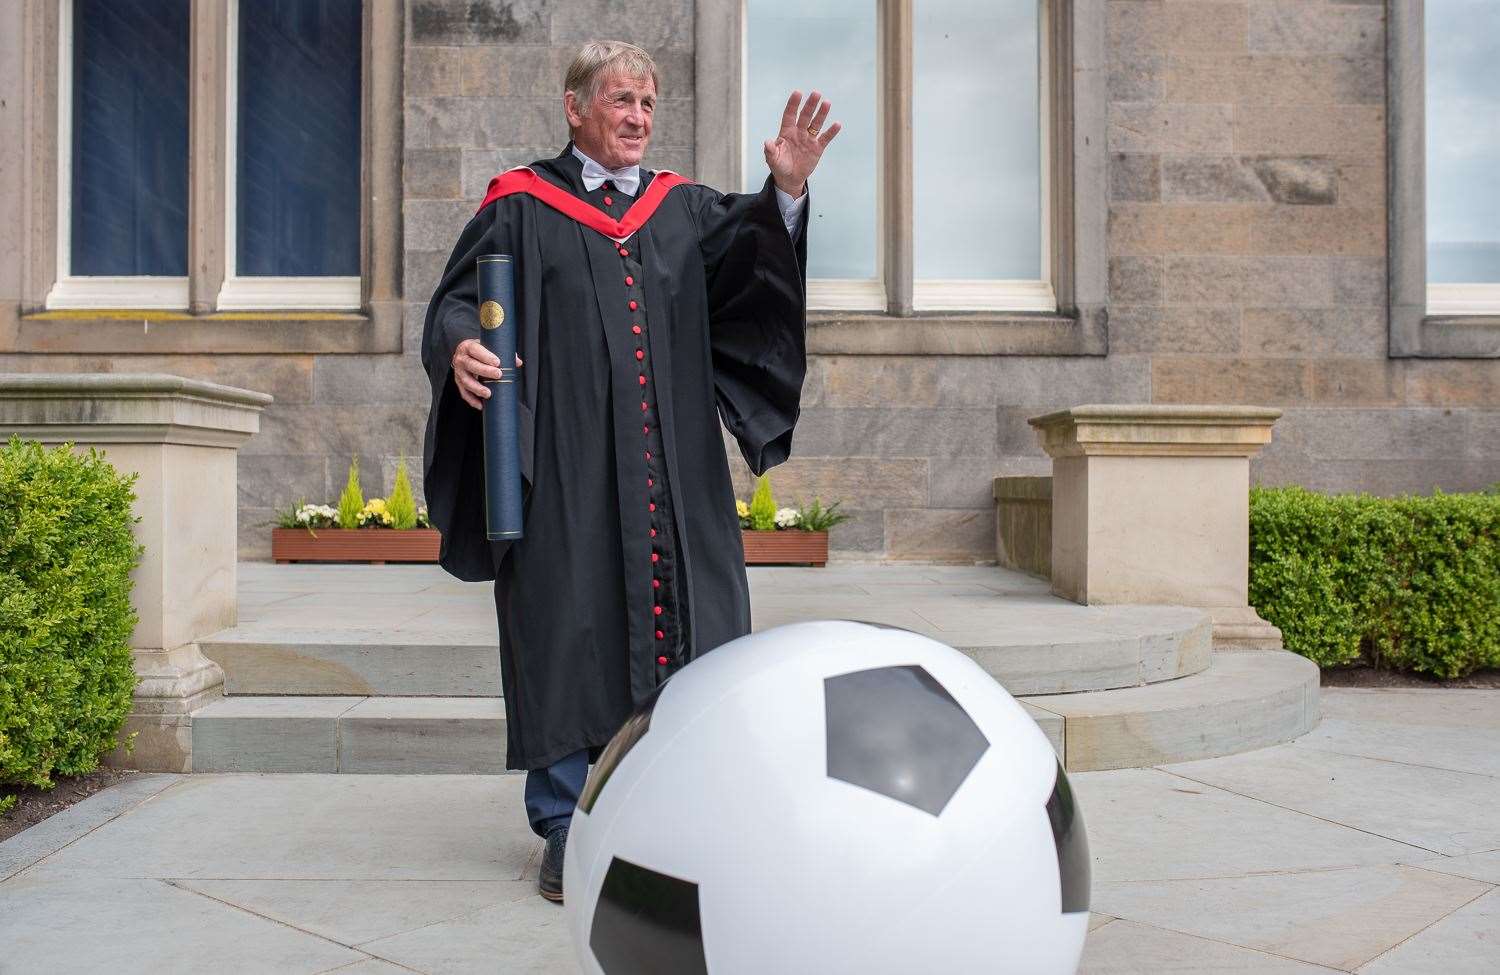 Sir Kenny joined students who missed out on in-person graduations in 2020 for the celebrations (St Andrews University/PA)